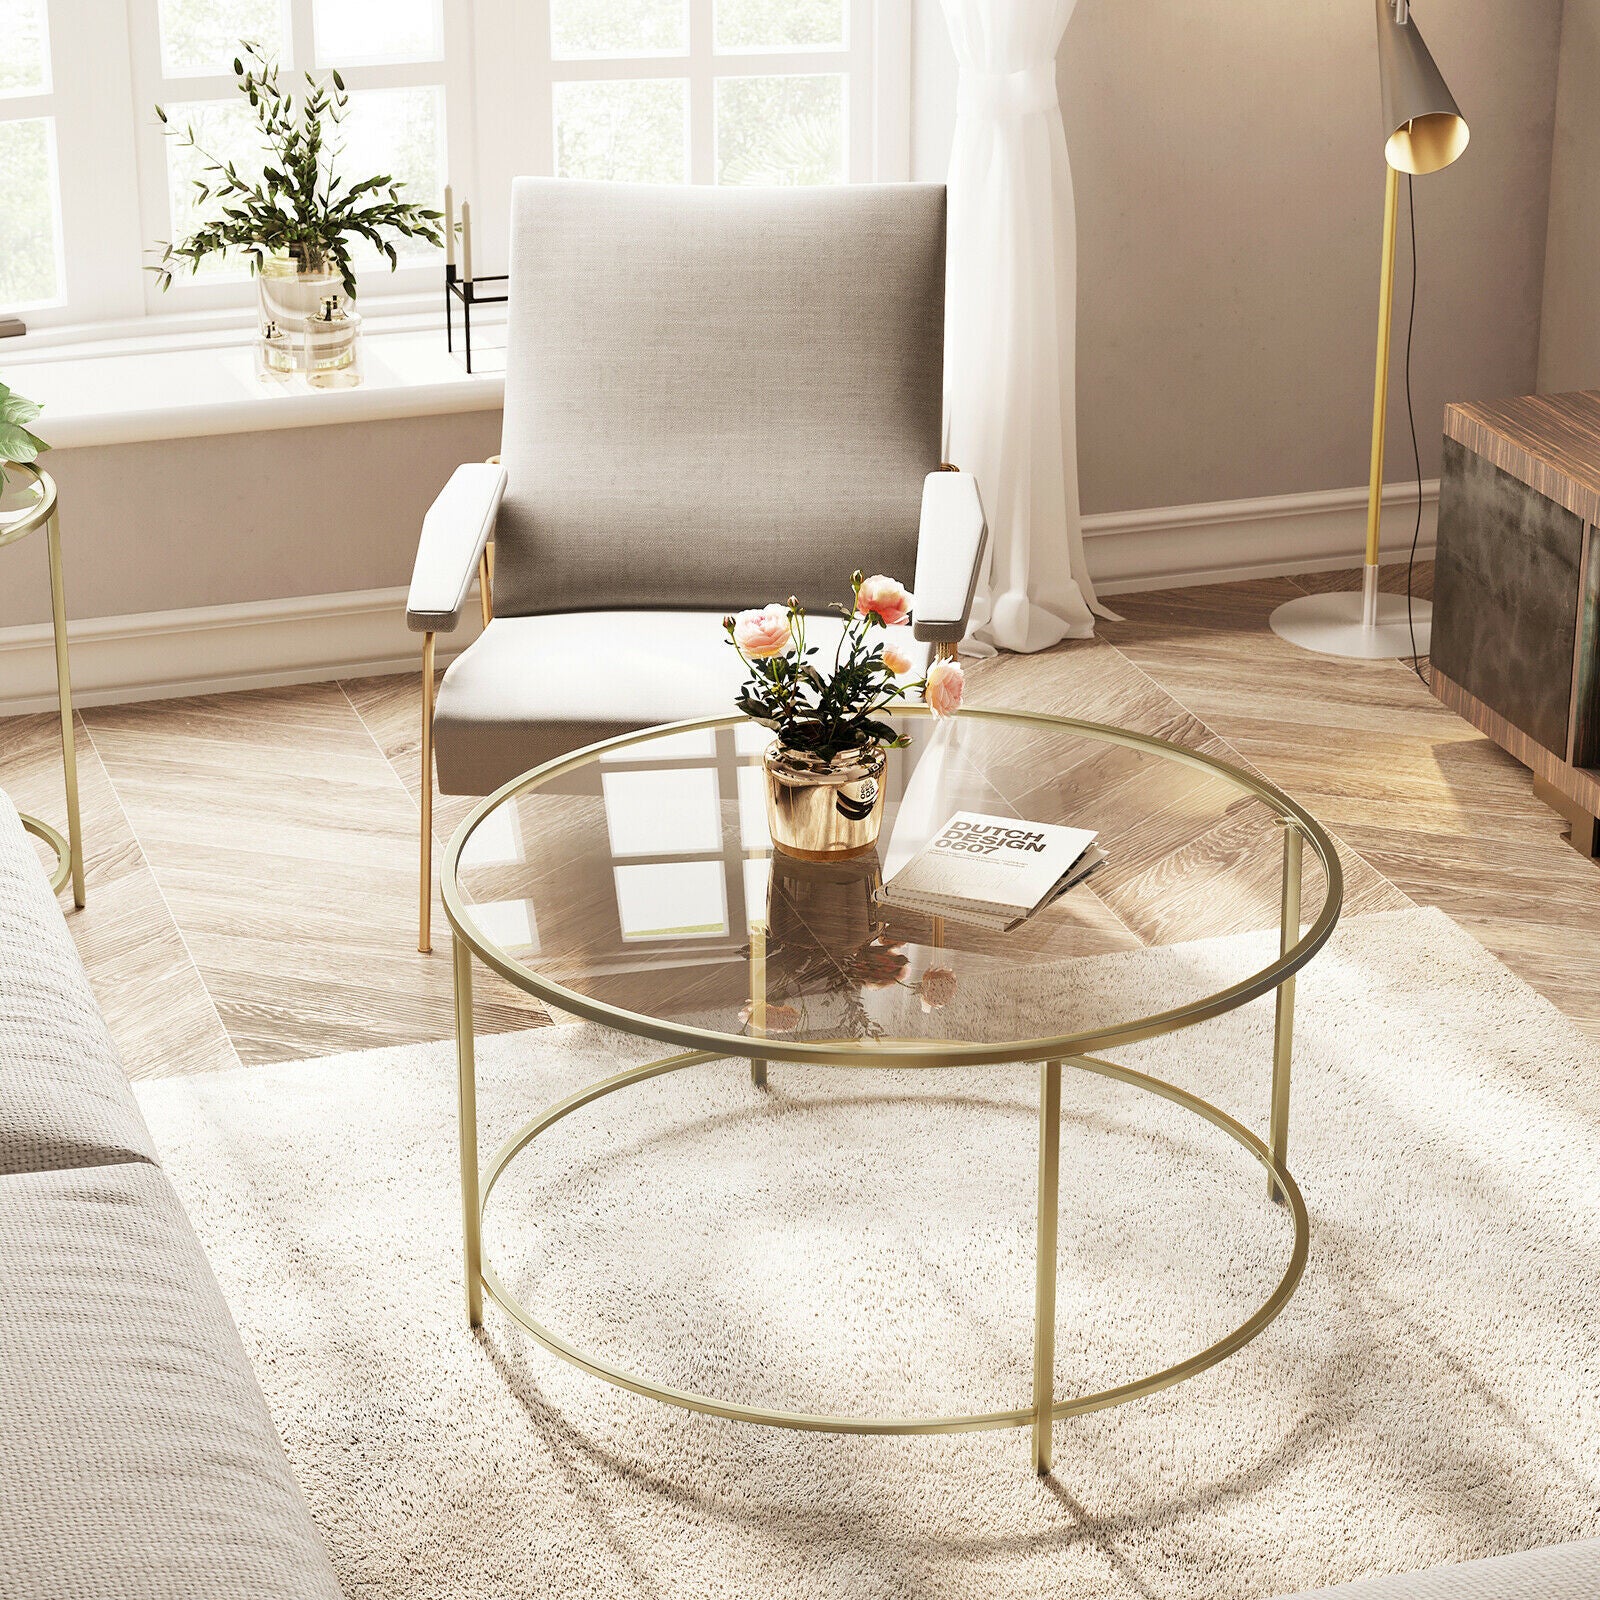 Jenna Round Glass Coffee Table Gold Frame